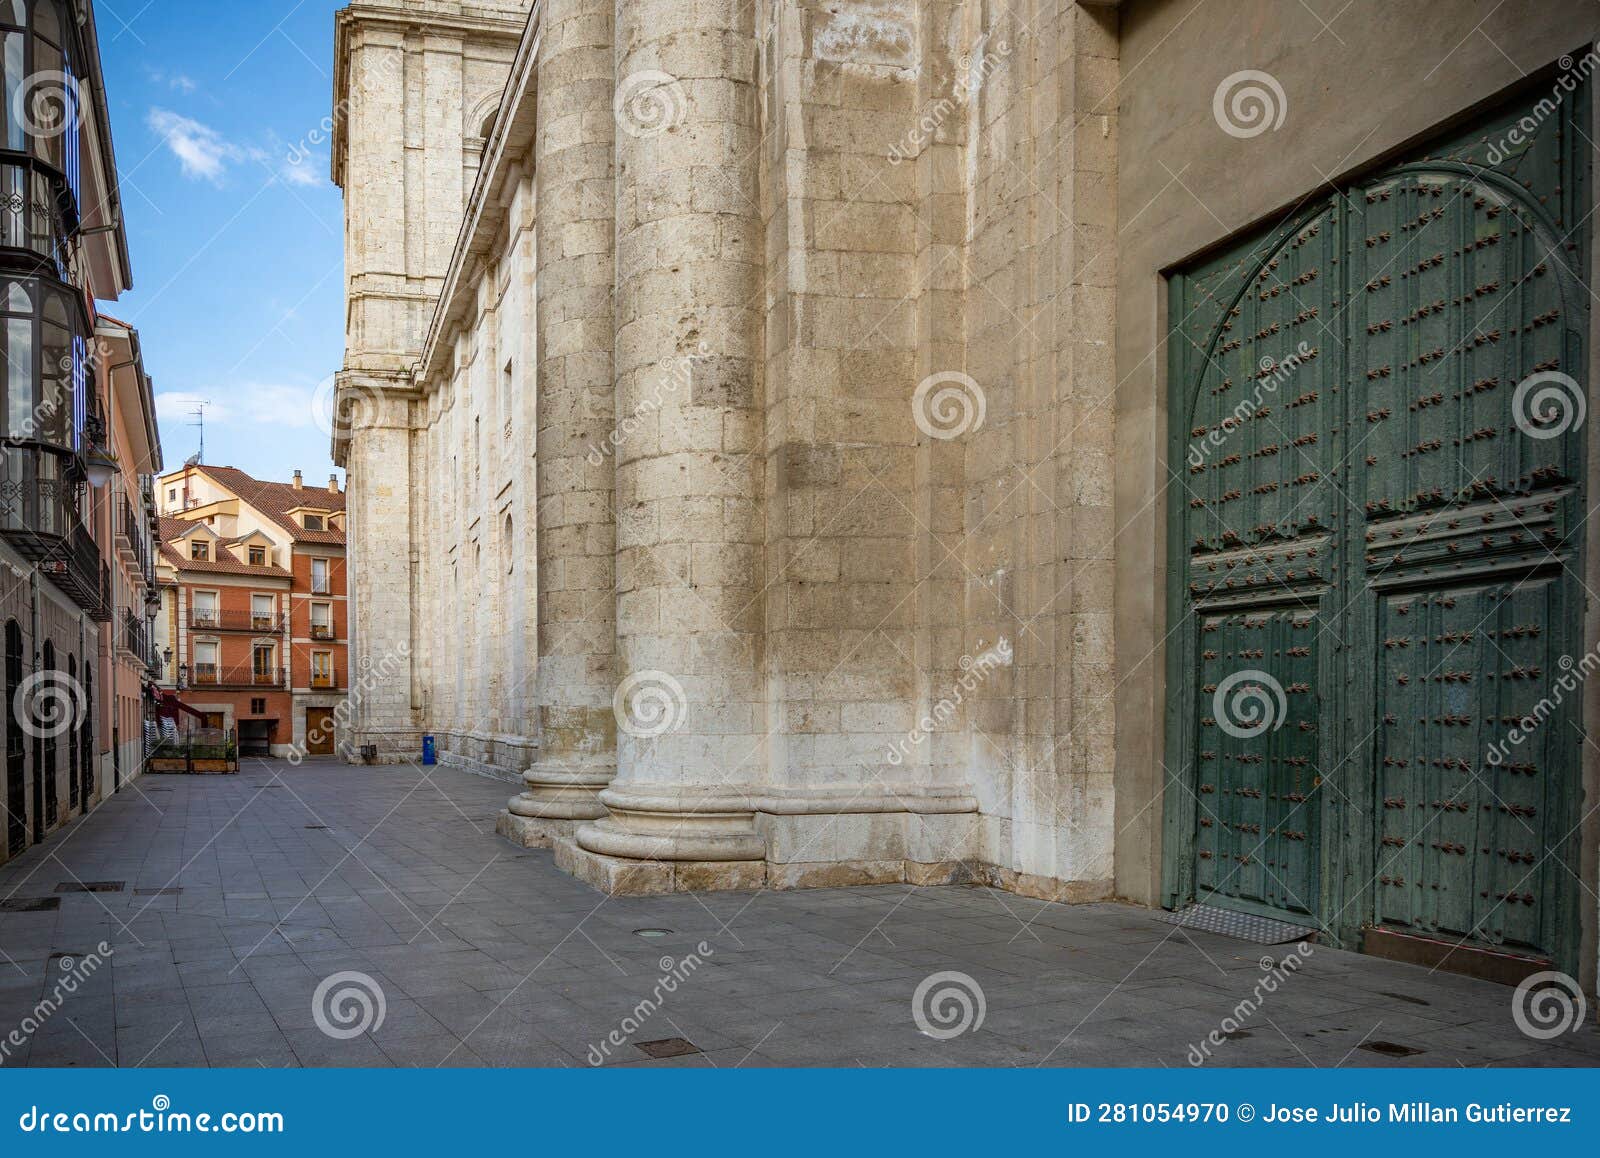 valladolid historical and cultural city of spain